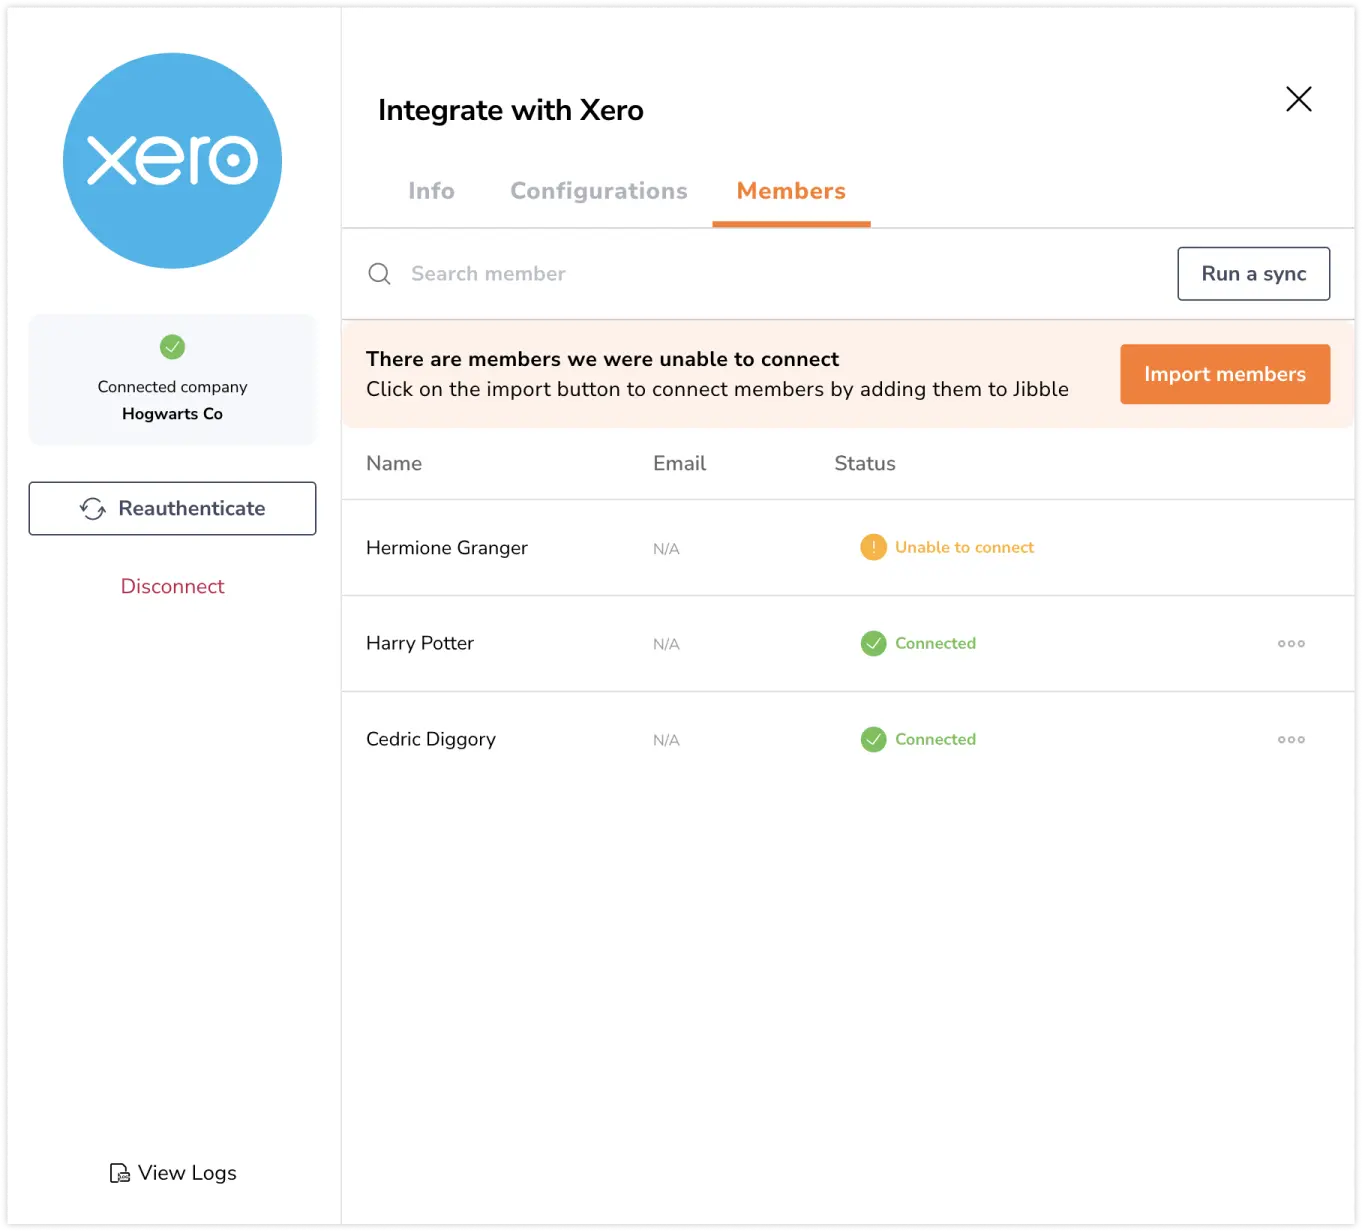 Syncing members from Xero to Jibble